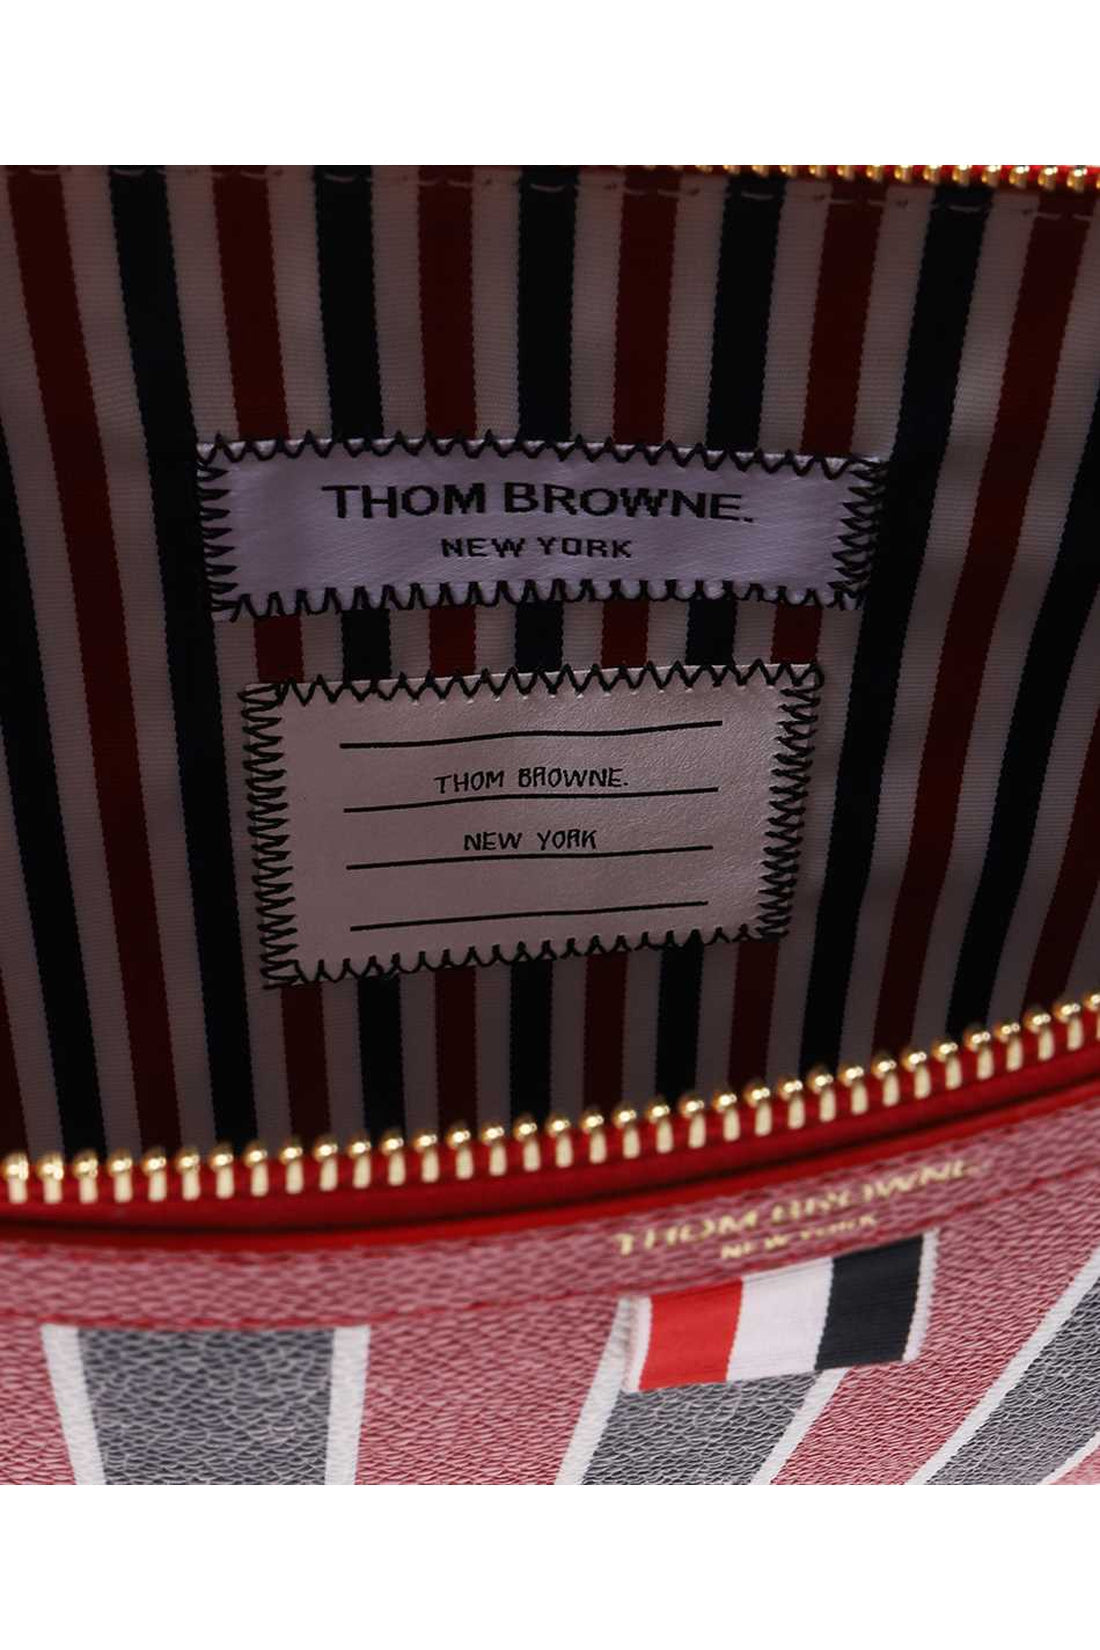 Thom Browne-OUTLET-SALE-Leather flat pouch-ARCHIVIST